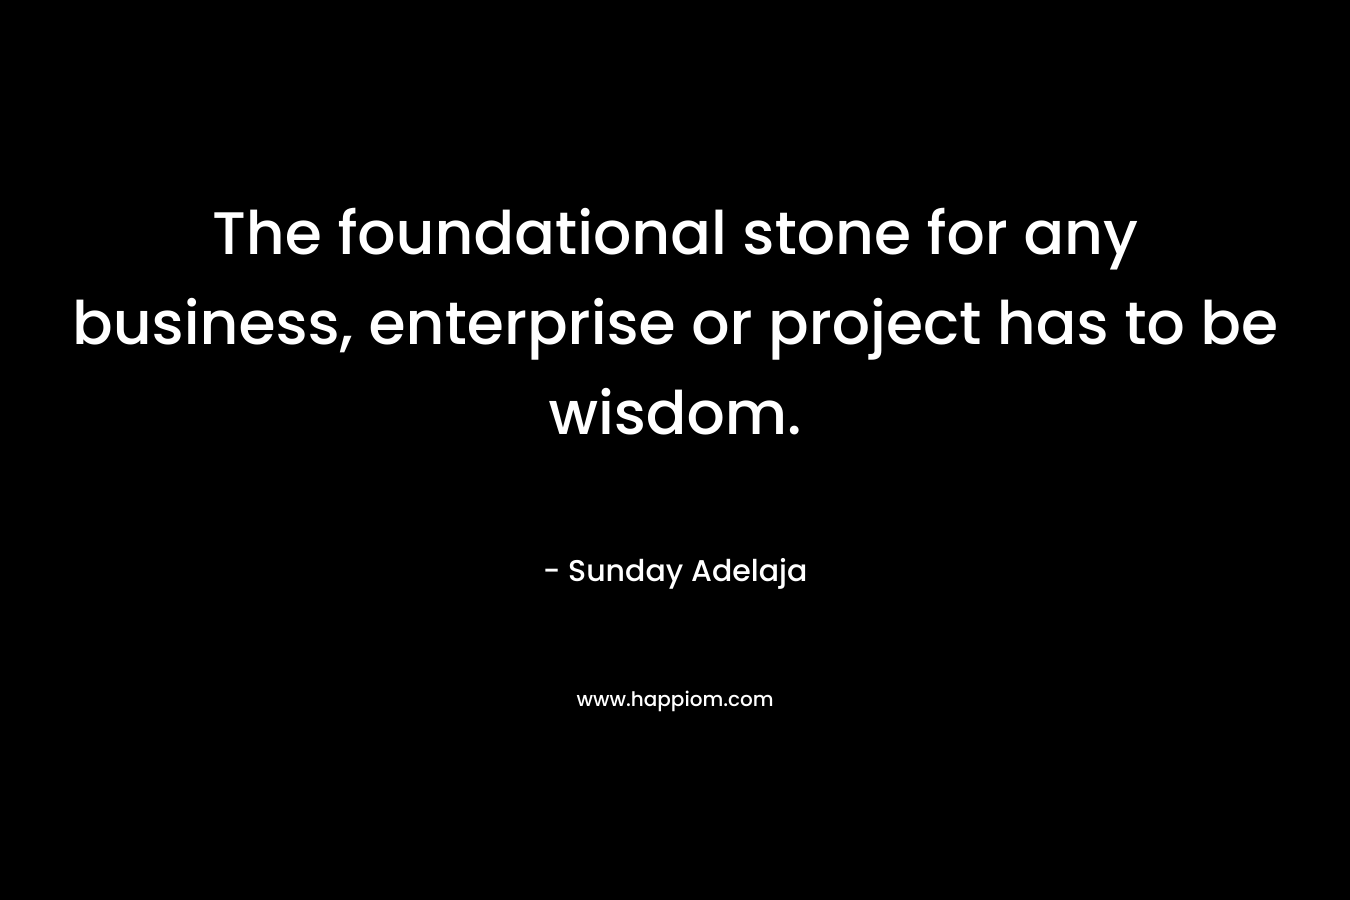 The foundational stone for any business, enterprise or project has to be wisdom.